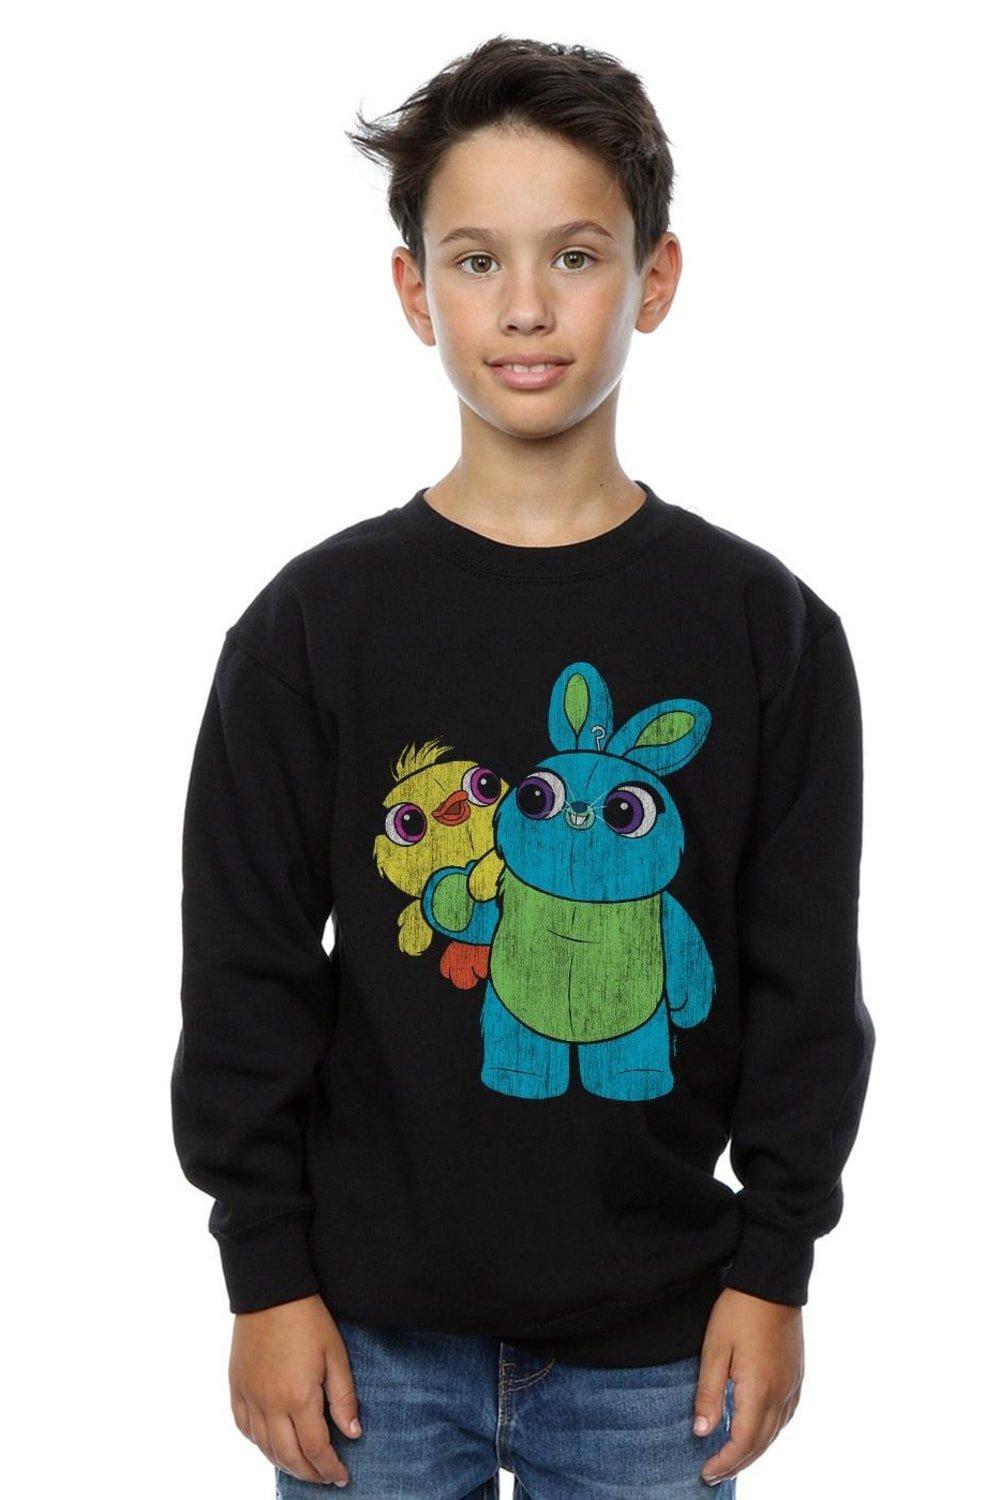 Toy Story 4 Ducky And Bunny Distressed Pose Sweatshirt